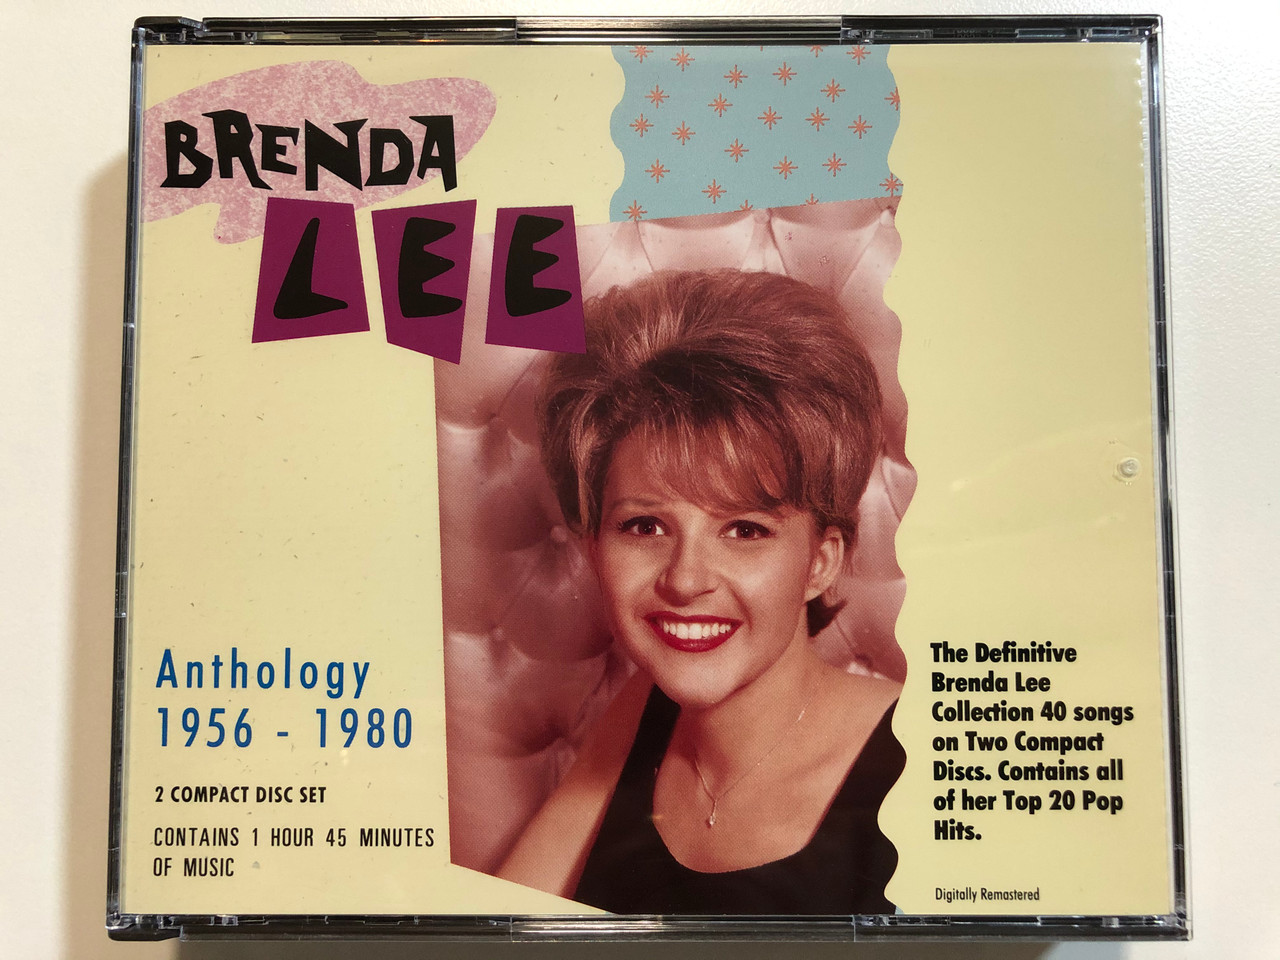 https://cdn10.bigcommerce.com/s-62bdpkt7pb/products/29361/images/175145/Brenda_Lee_Anthology_1956-1980_The_Definitive_Brenda_Lee_Collection_40_Songs_on_Two_Compact_Discs._Contains_all_of_her_Top_20_Pop_Hits._Contains_1_Hour_45_Minutes_of_music_MCA_Records_2x_1__10286.1618429223.1280.1280.JPG?c=2&_ga=2.108899137.2106526039.1618490327-95516592.1618490327